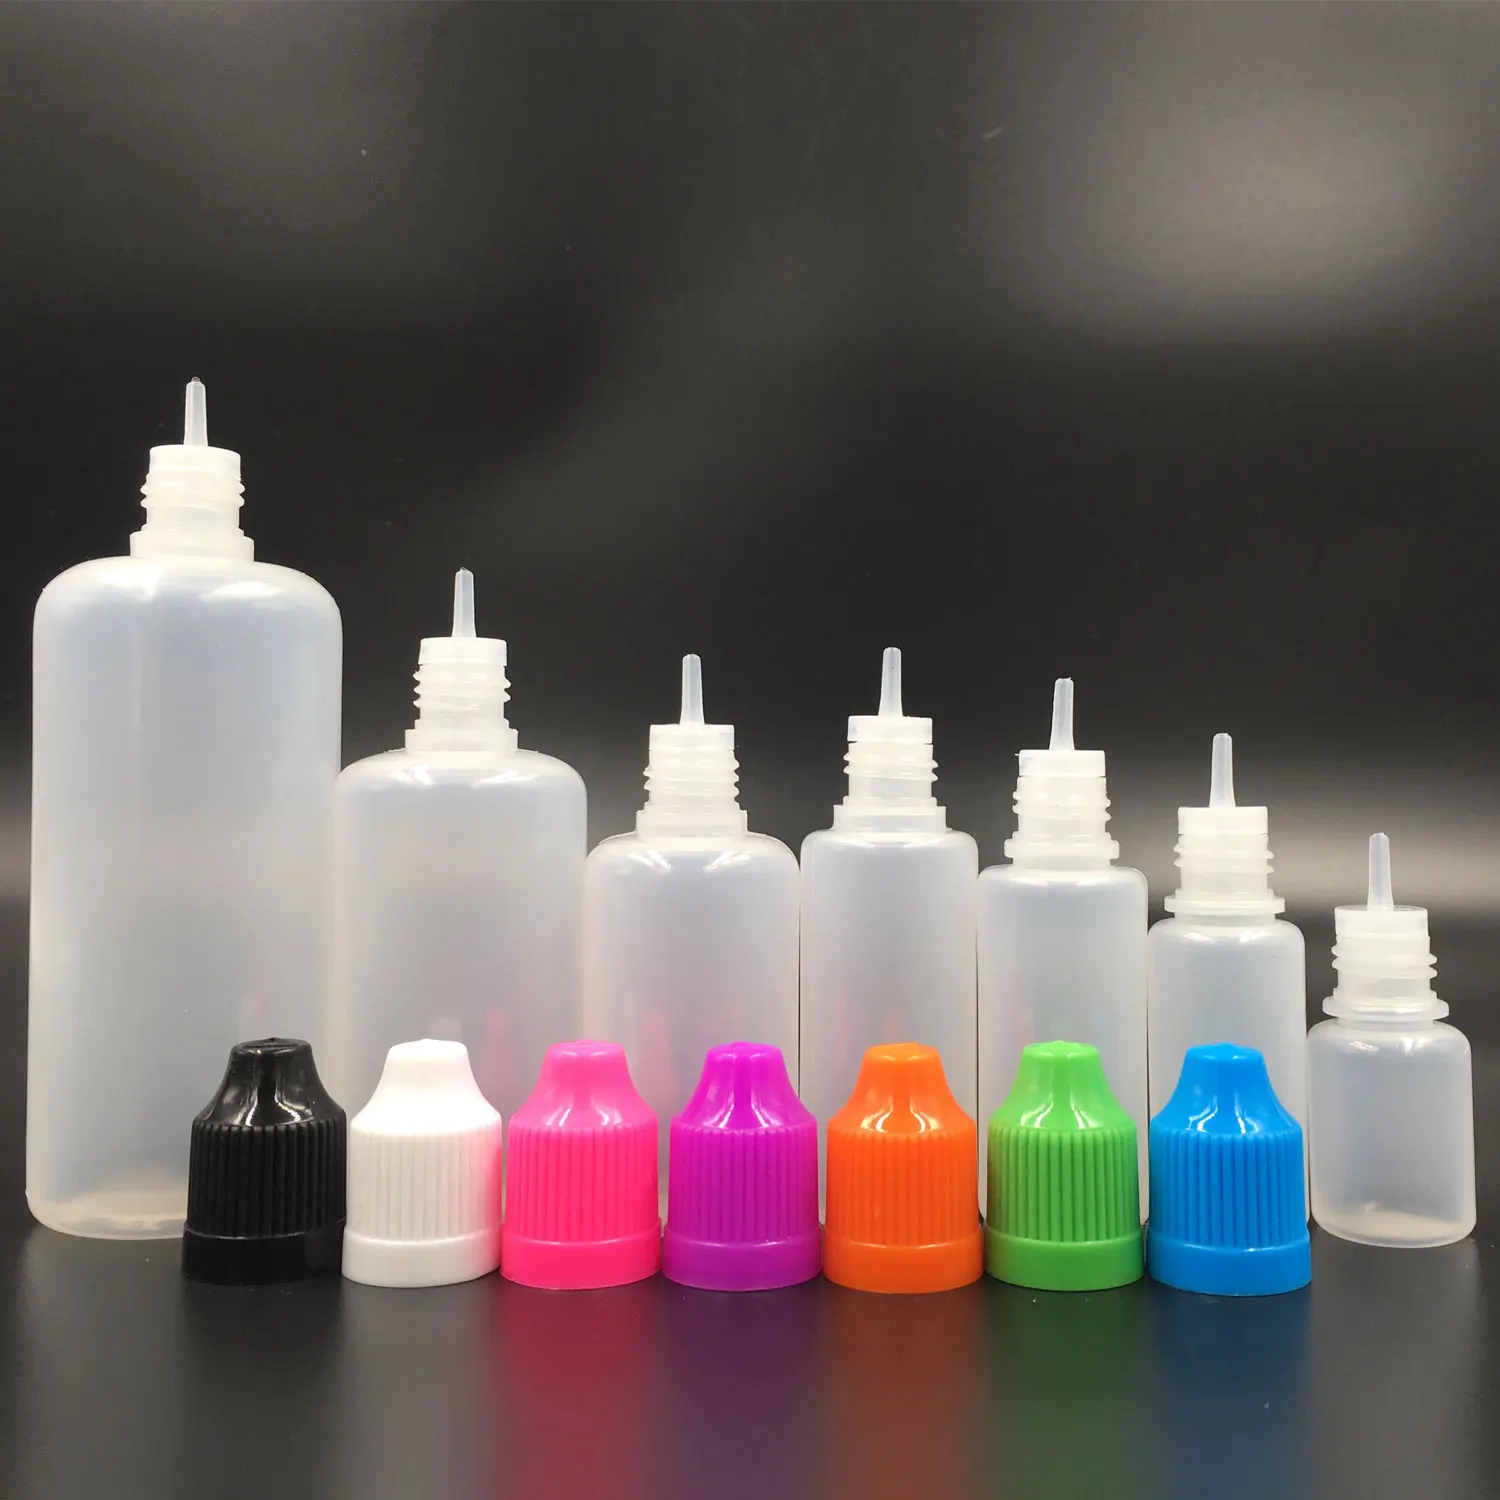 10pcs 5ml-120ml Empty Soft LDPE Dropper Bottles Plastic Containers for E Liquid Vape Bottle with Mixed Caps Lid Plugs mofii candy keyboard mouse combo 2 4g wireless mixed color 84 key mini keyboard mouse set with circular punk key caps light brown